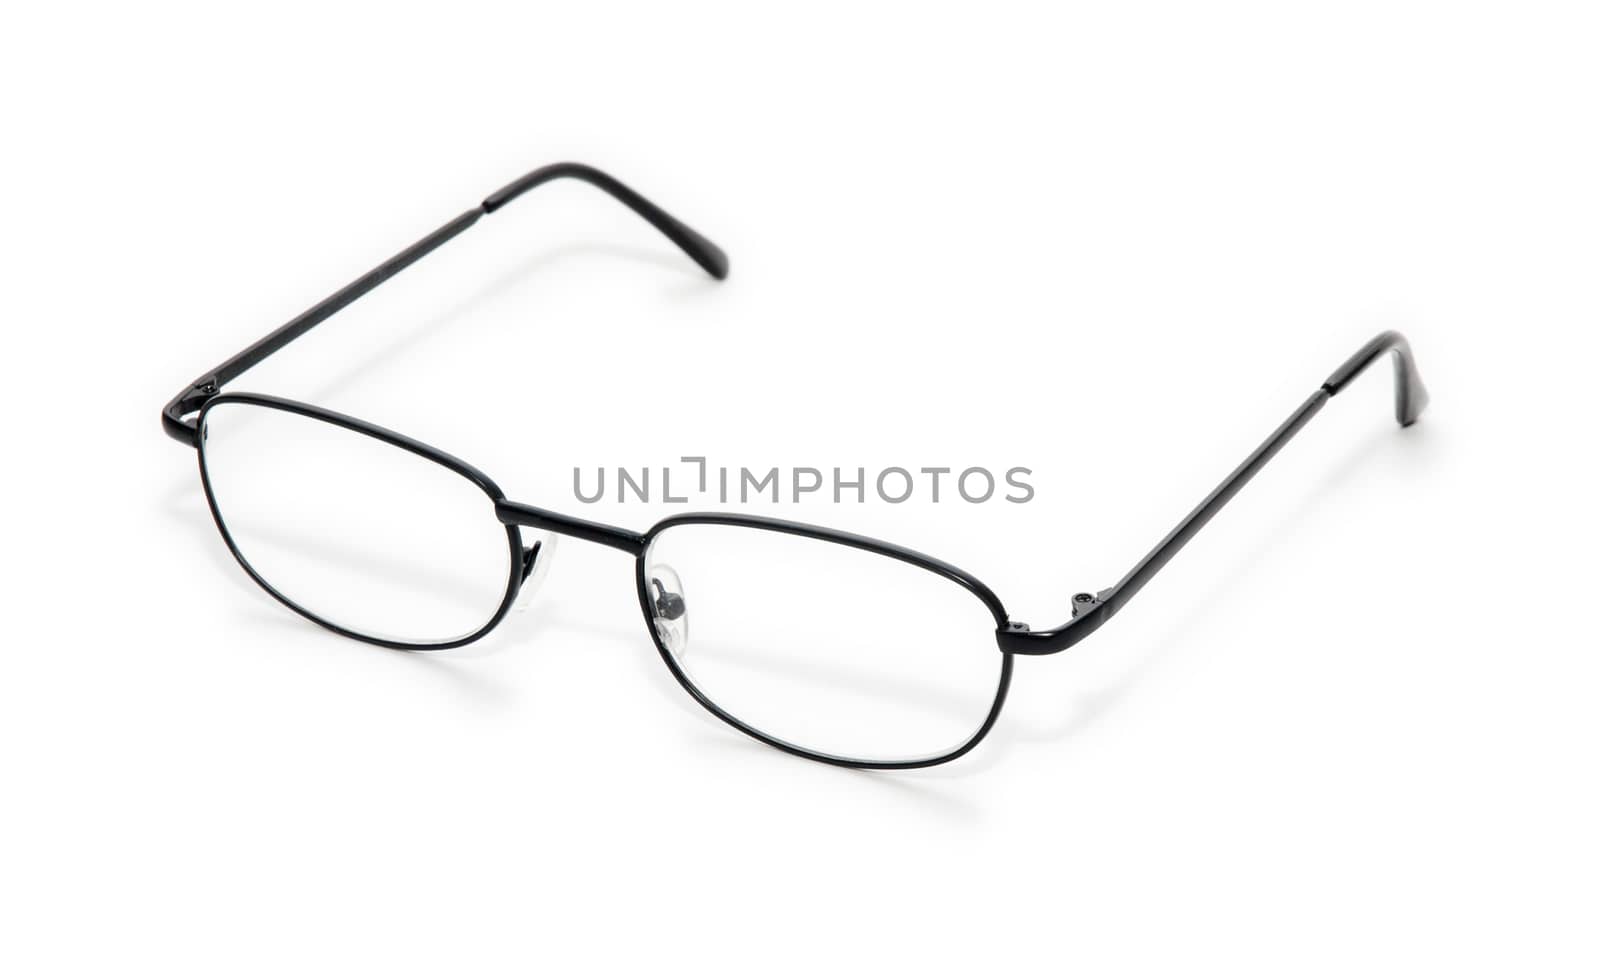 Black wire rim glasses isolated on a white background.